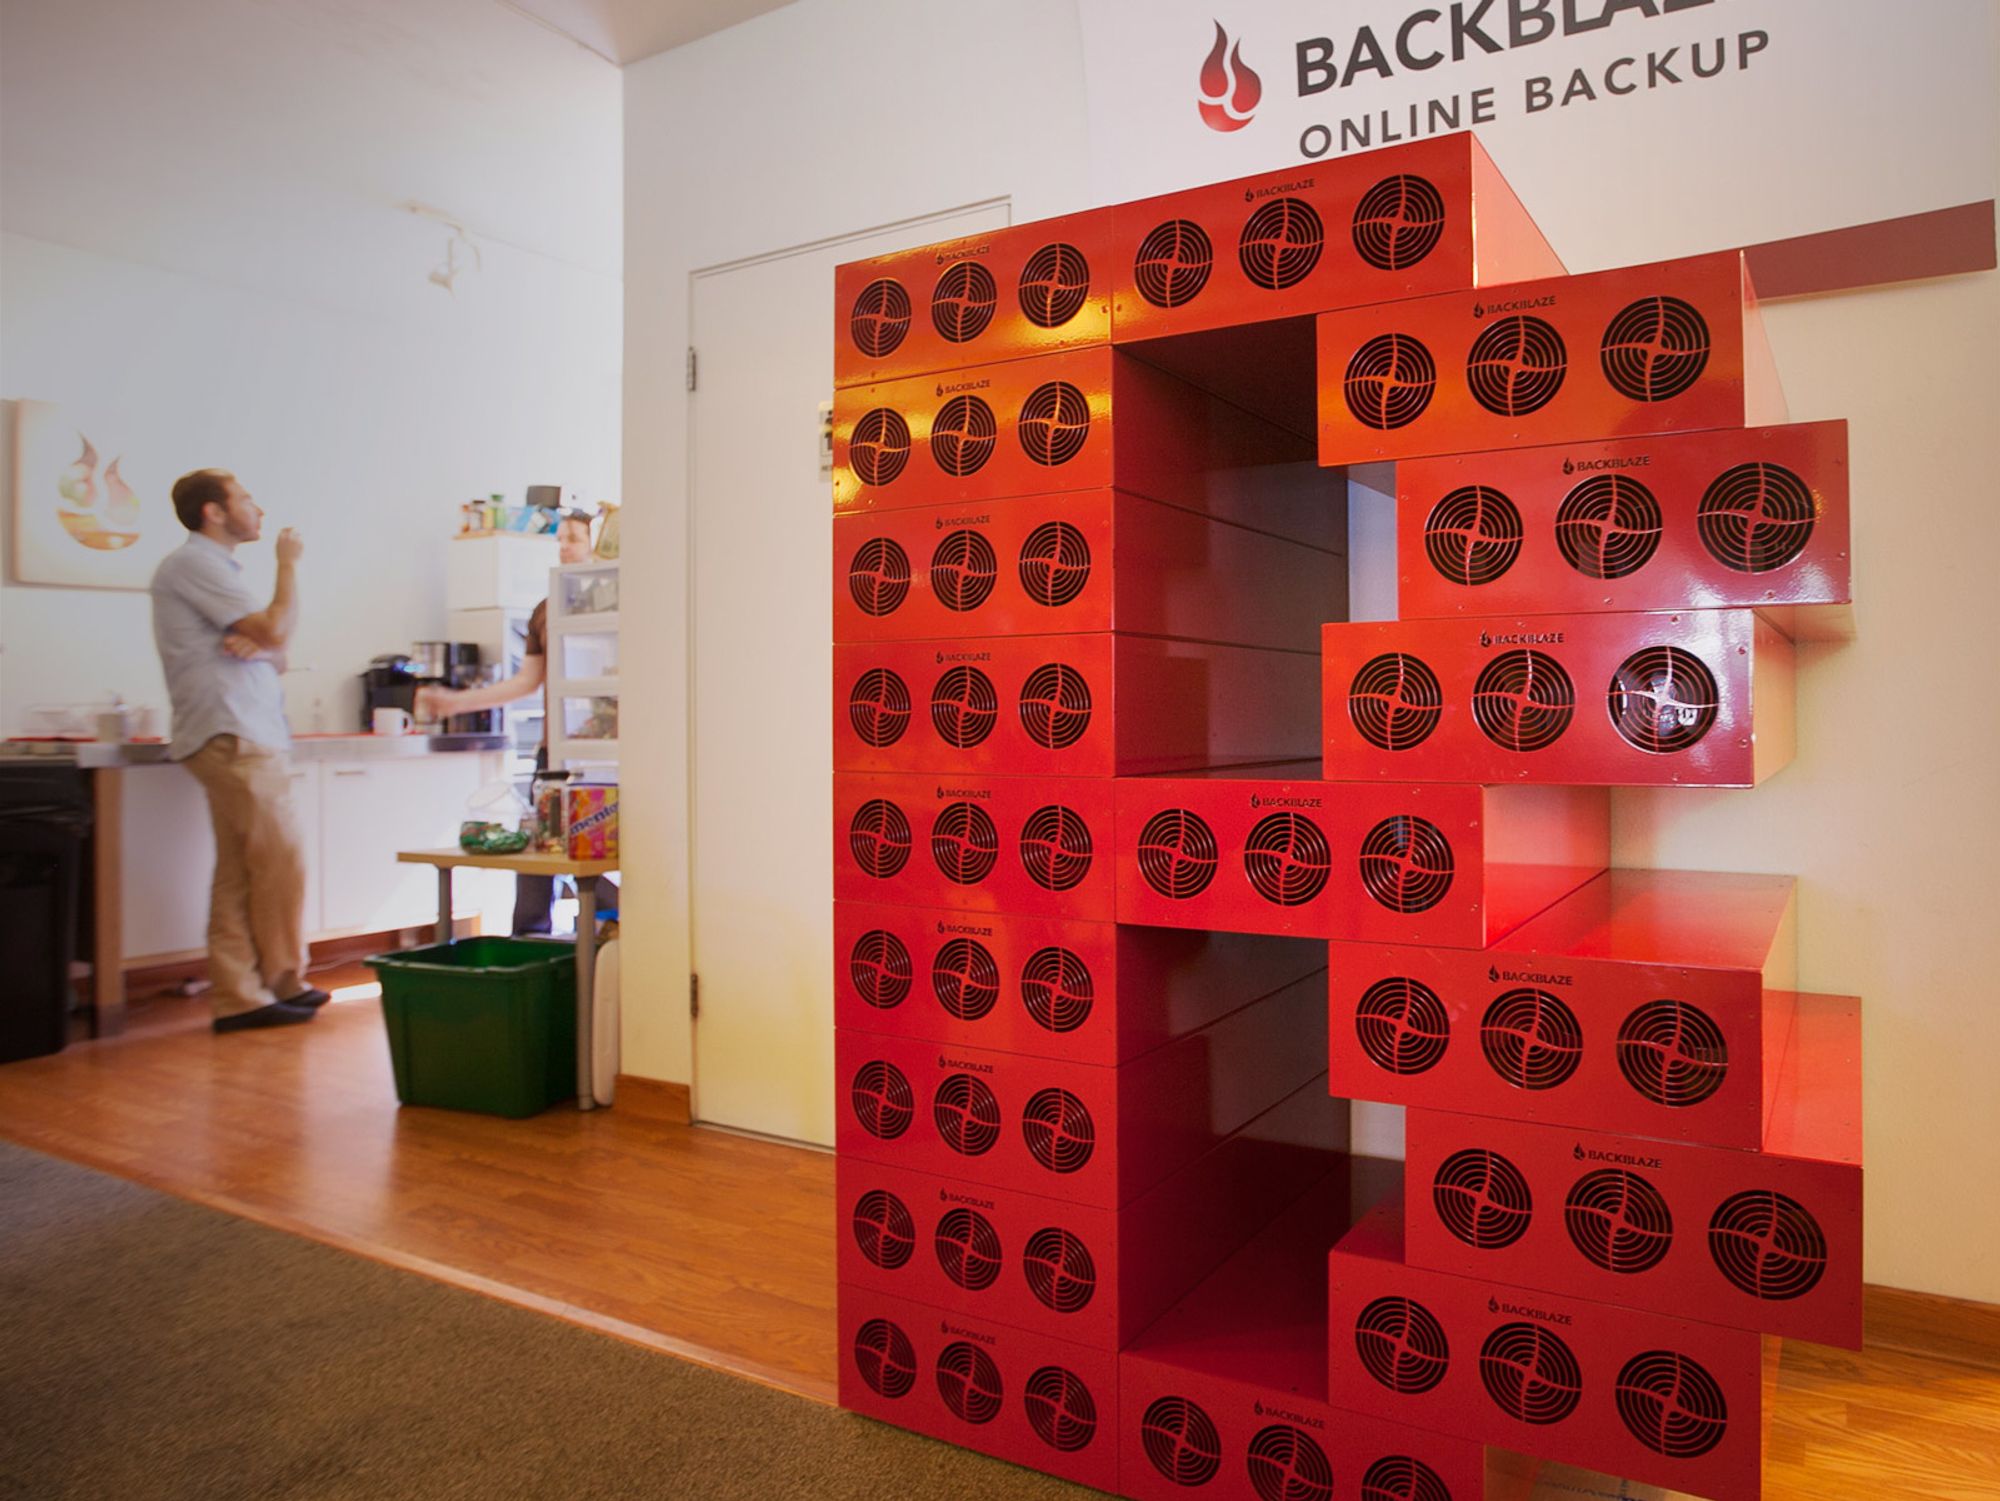 Backblaze is an online computer backup and cloud storage company based in San Mateo, California.